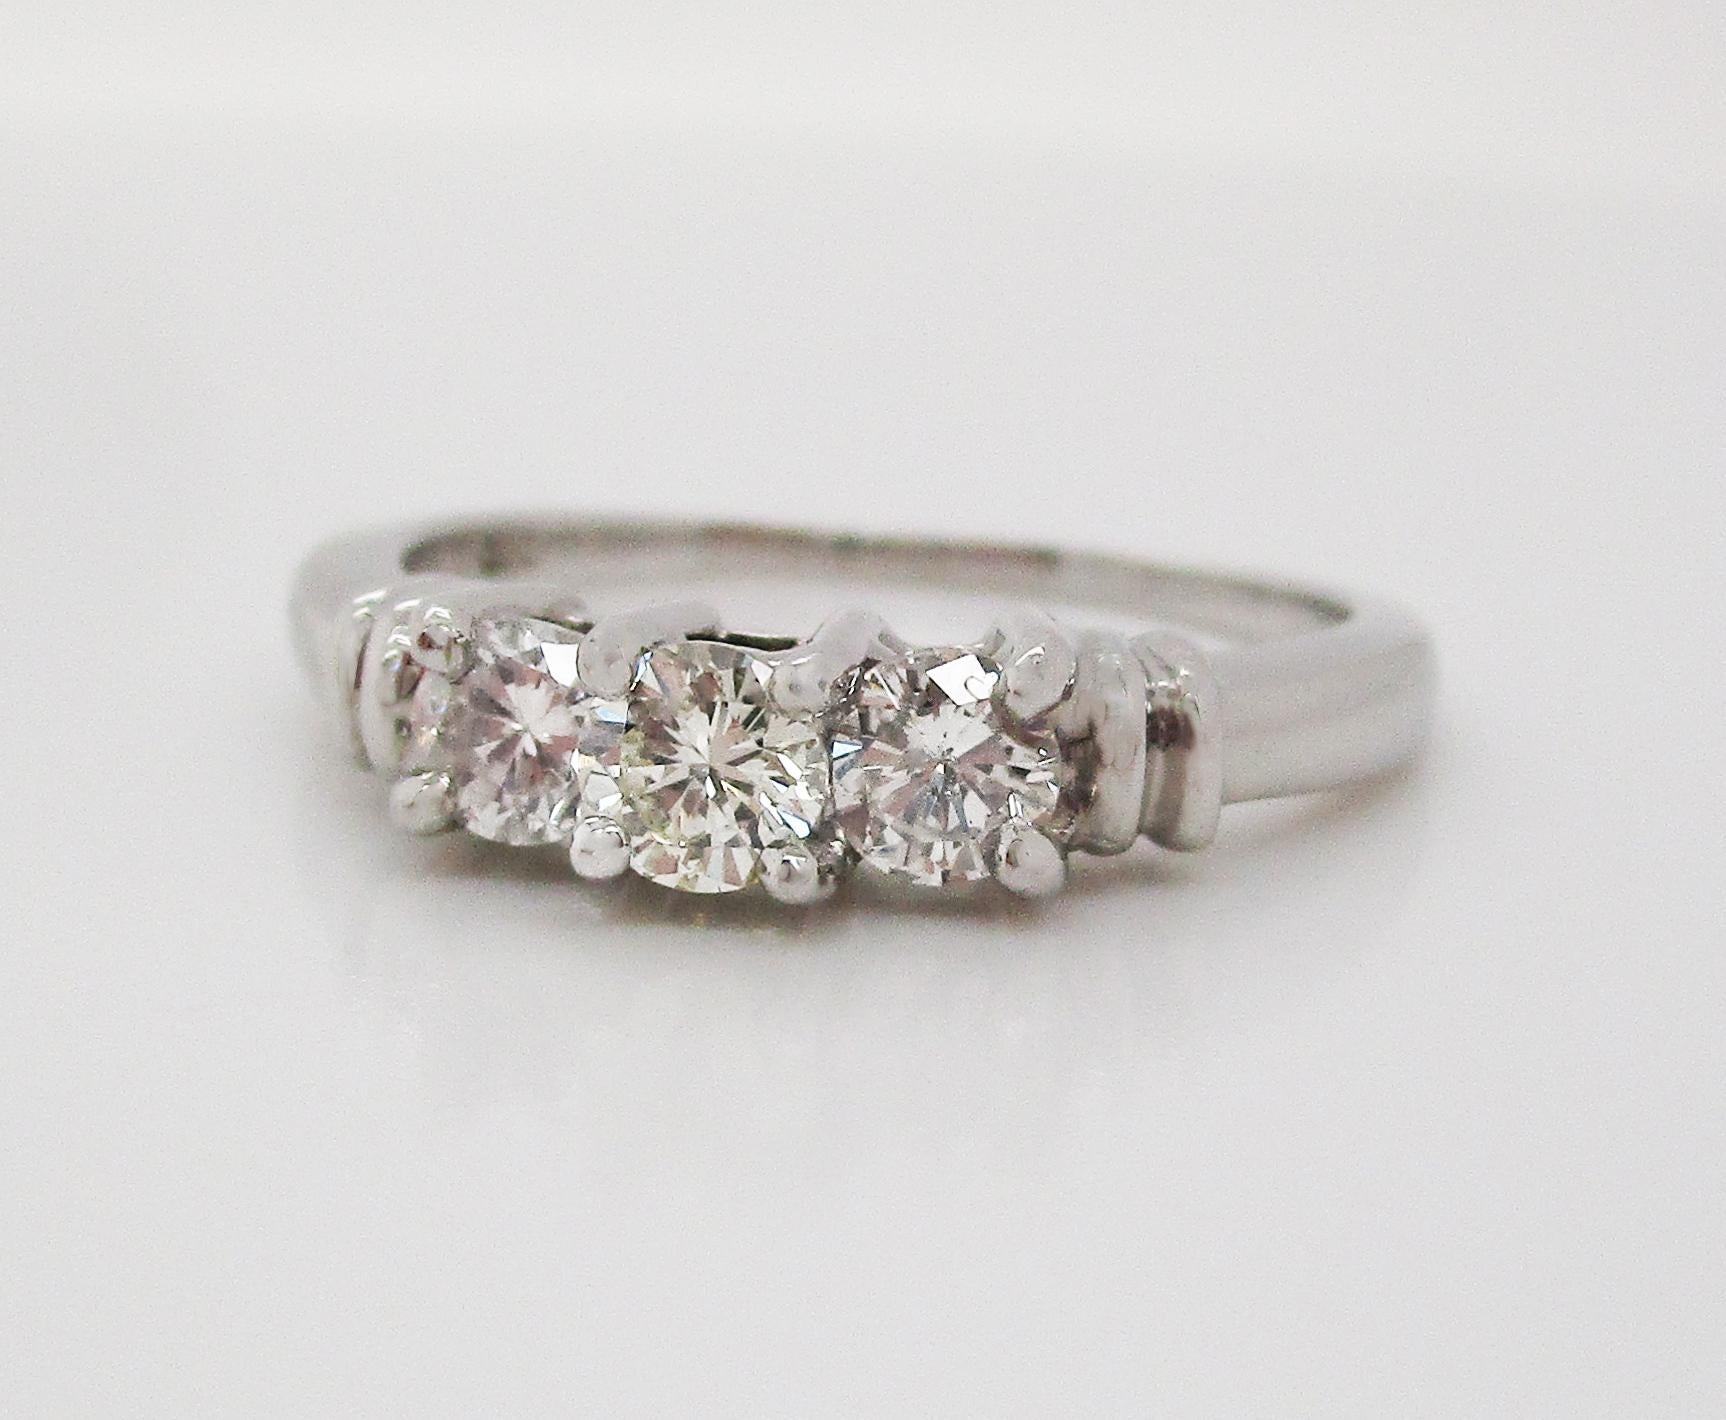 This gorgeous three stone diamond engagement ring is in bright white platinum and has a gorgeous contemporary look! The three diamonds in this ring are set in a stepped design with an architectural under-gallery. The stepped design of the ring